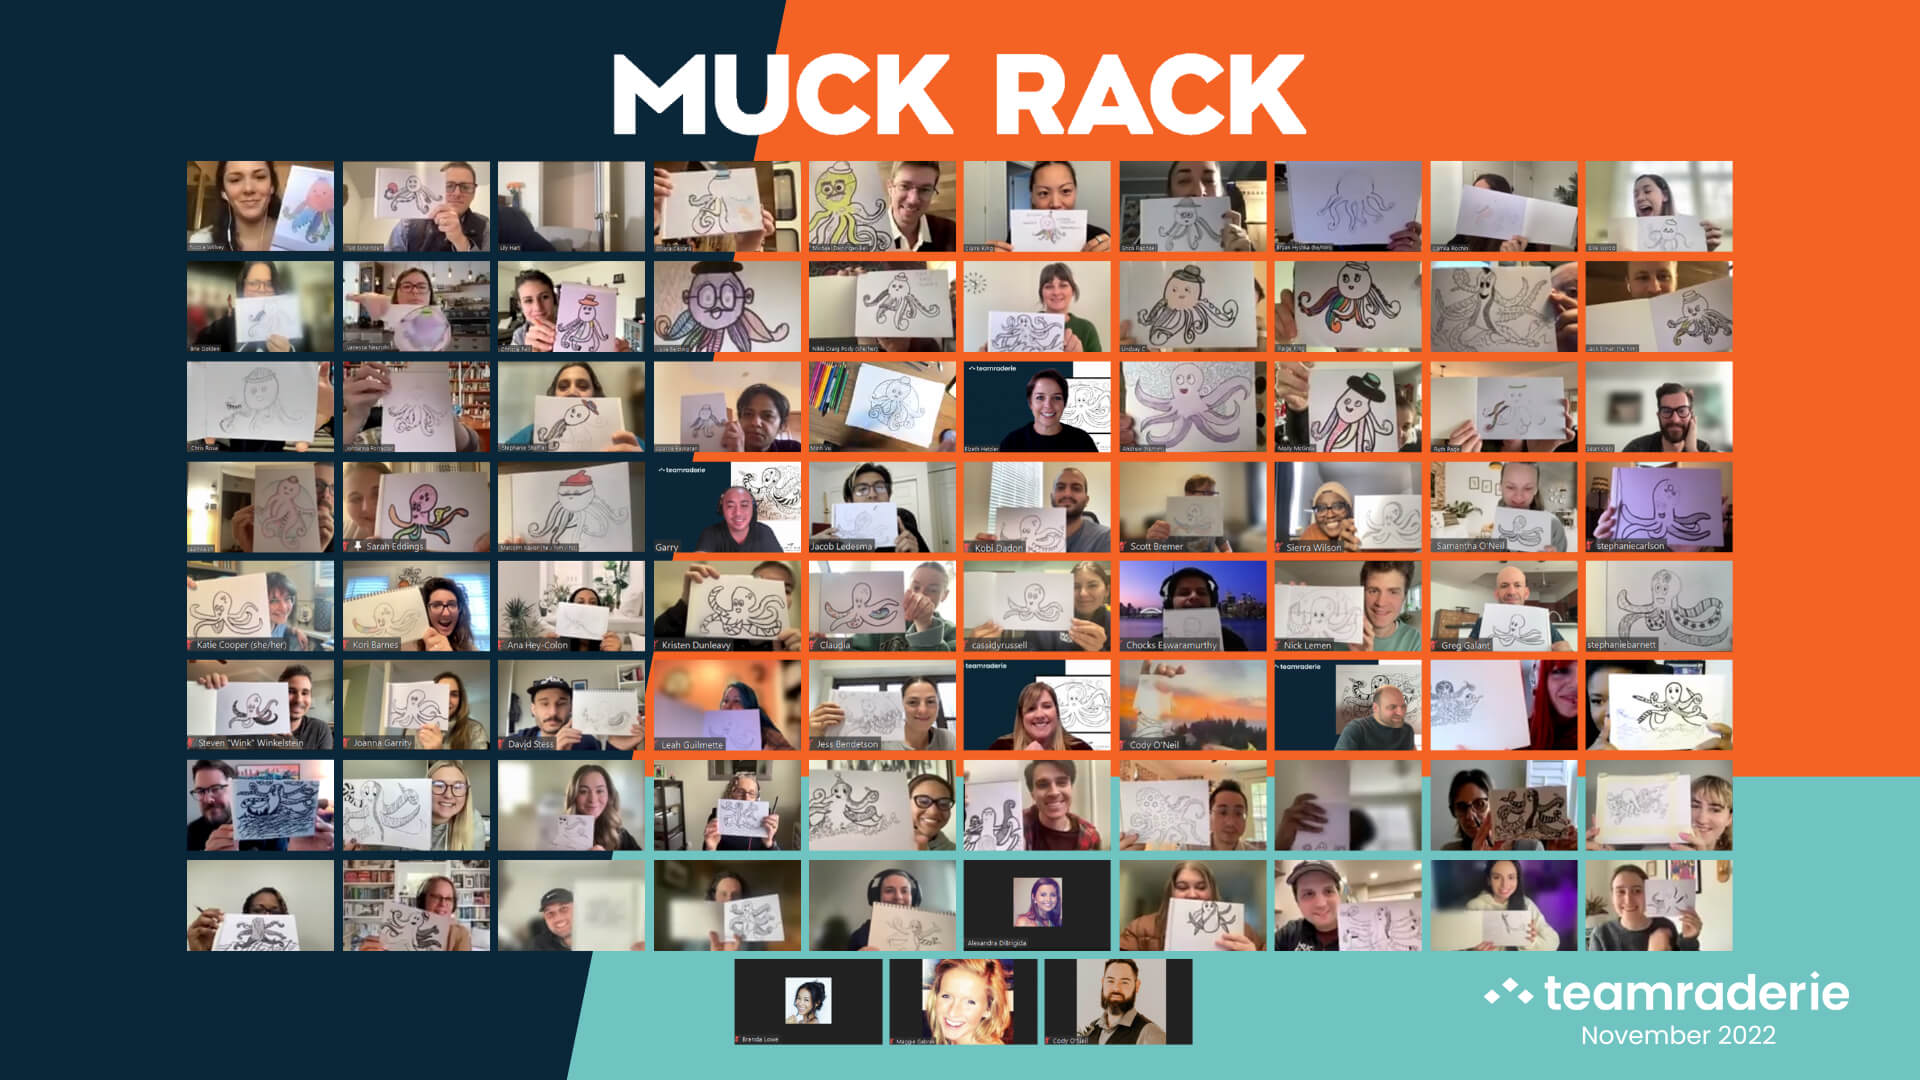 best places to work - muck rack